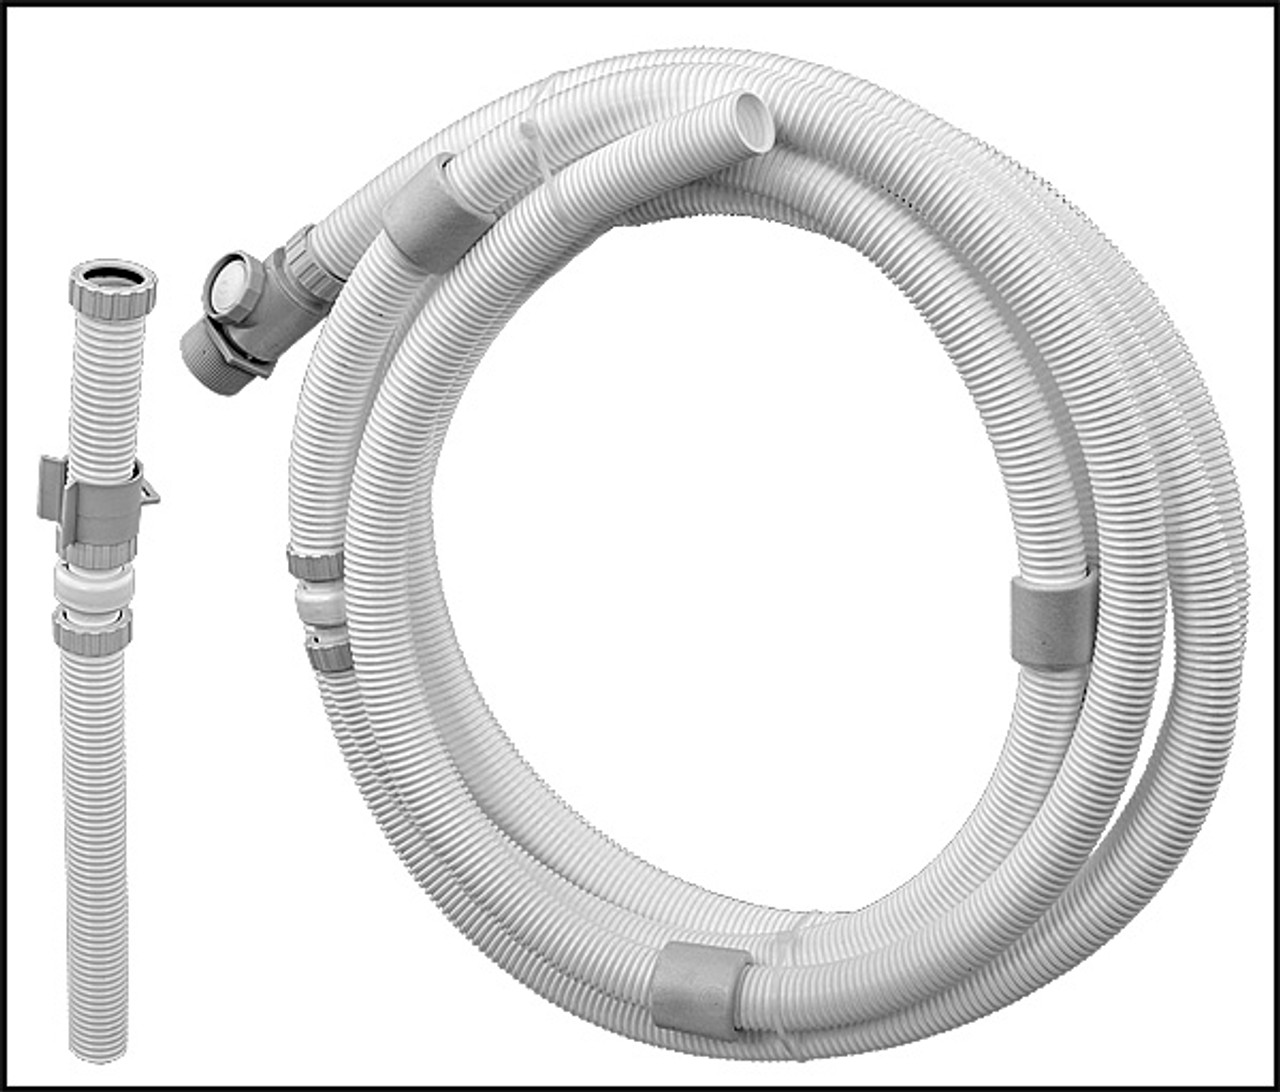 Polaris Complete Feed Hose For 360 Series Pool Cleaners (#9-100-3100)